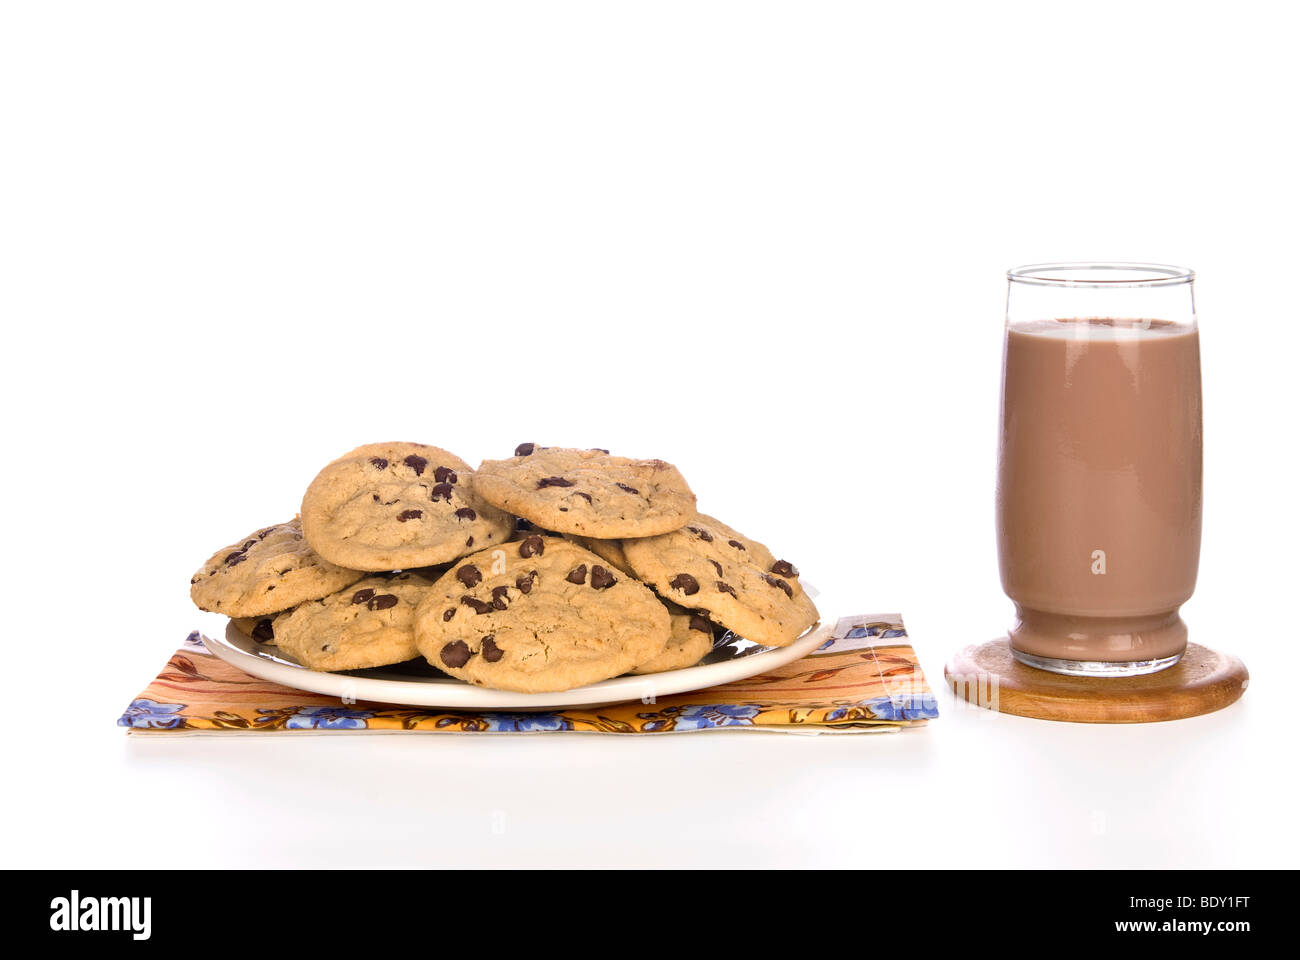 A plate full of homemade chocolate chip cookies with a cold glass of chocolate milk ready to consume. Stock Photo